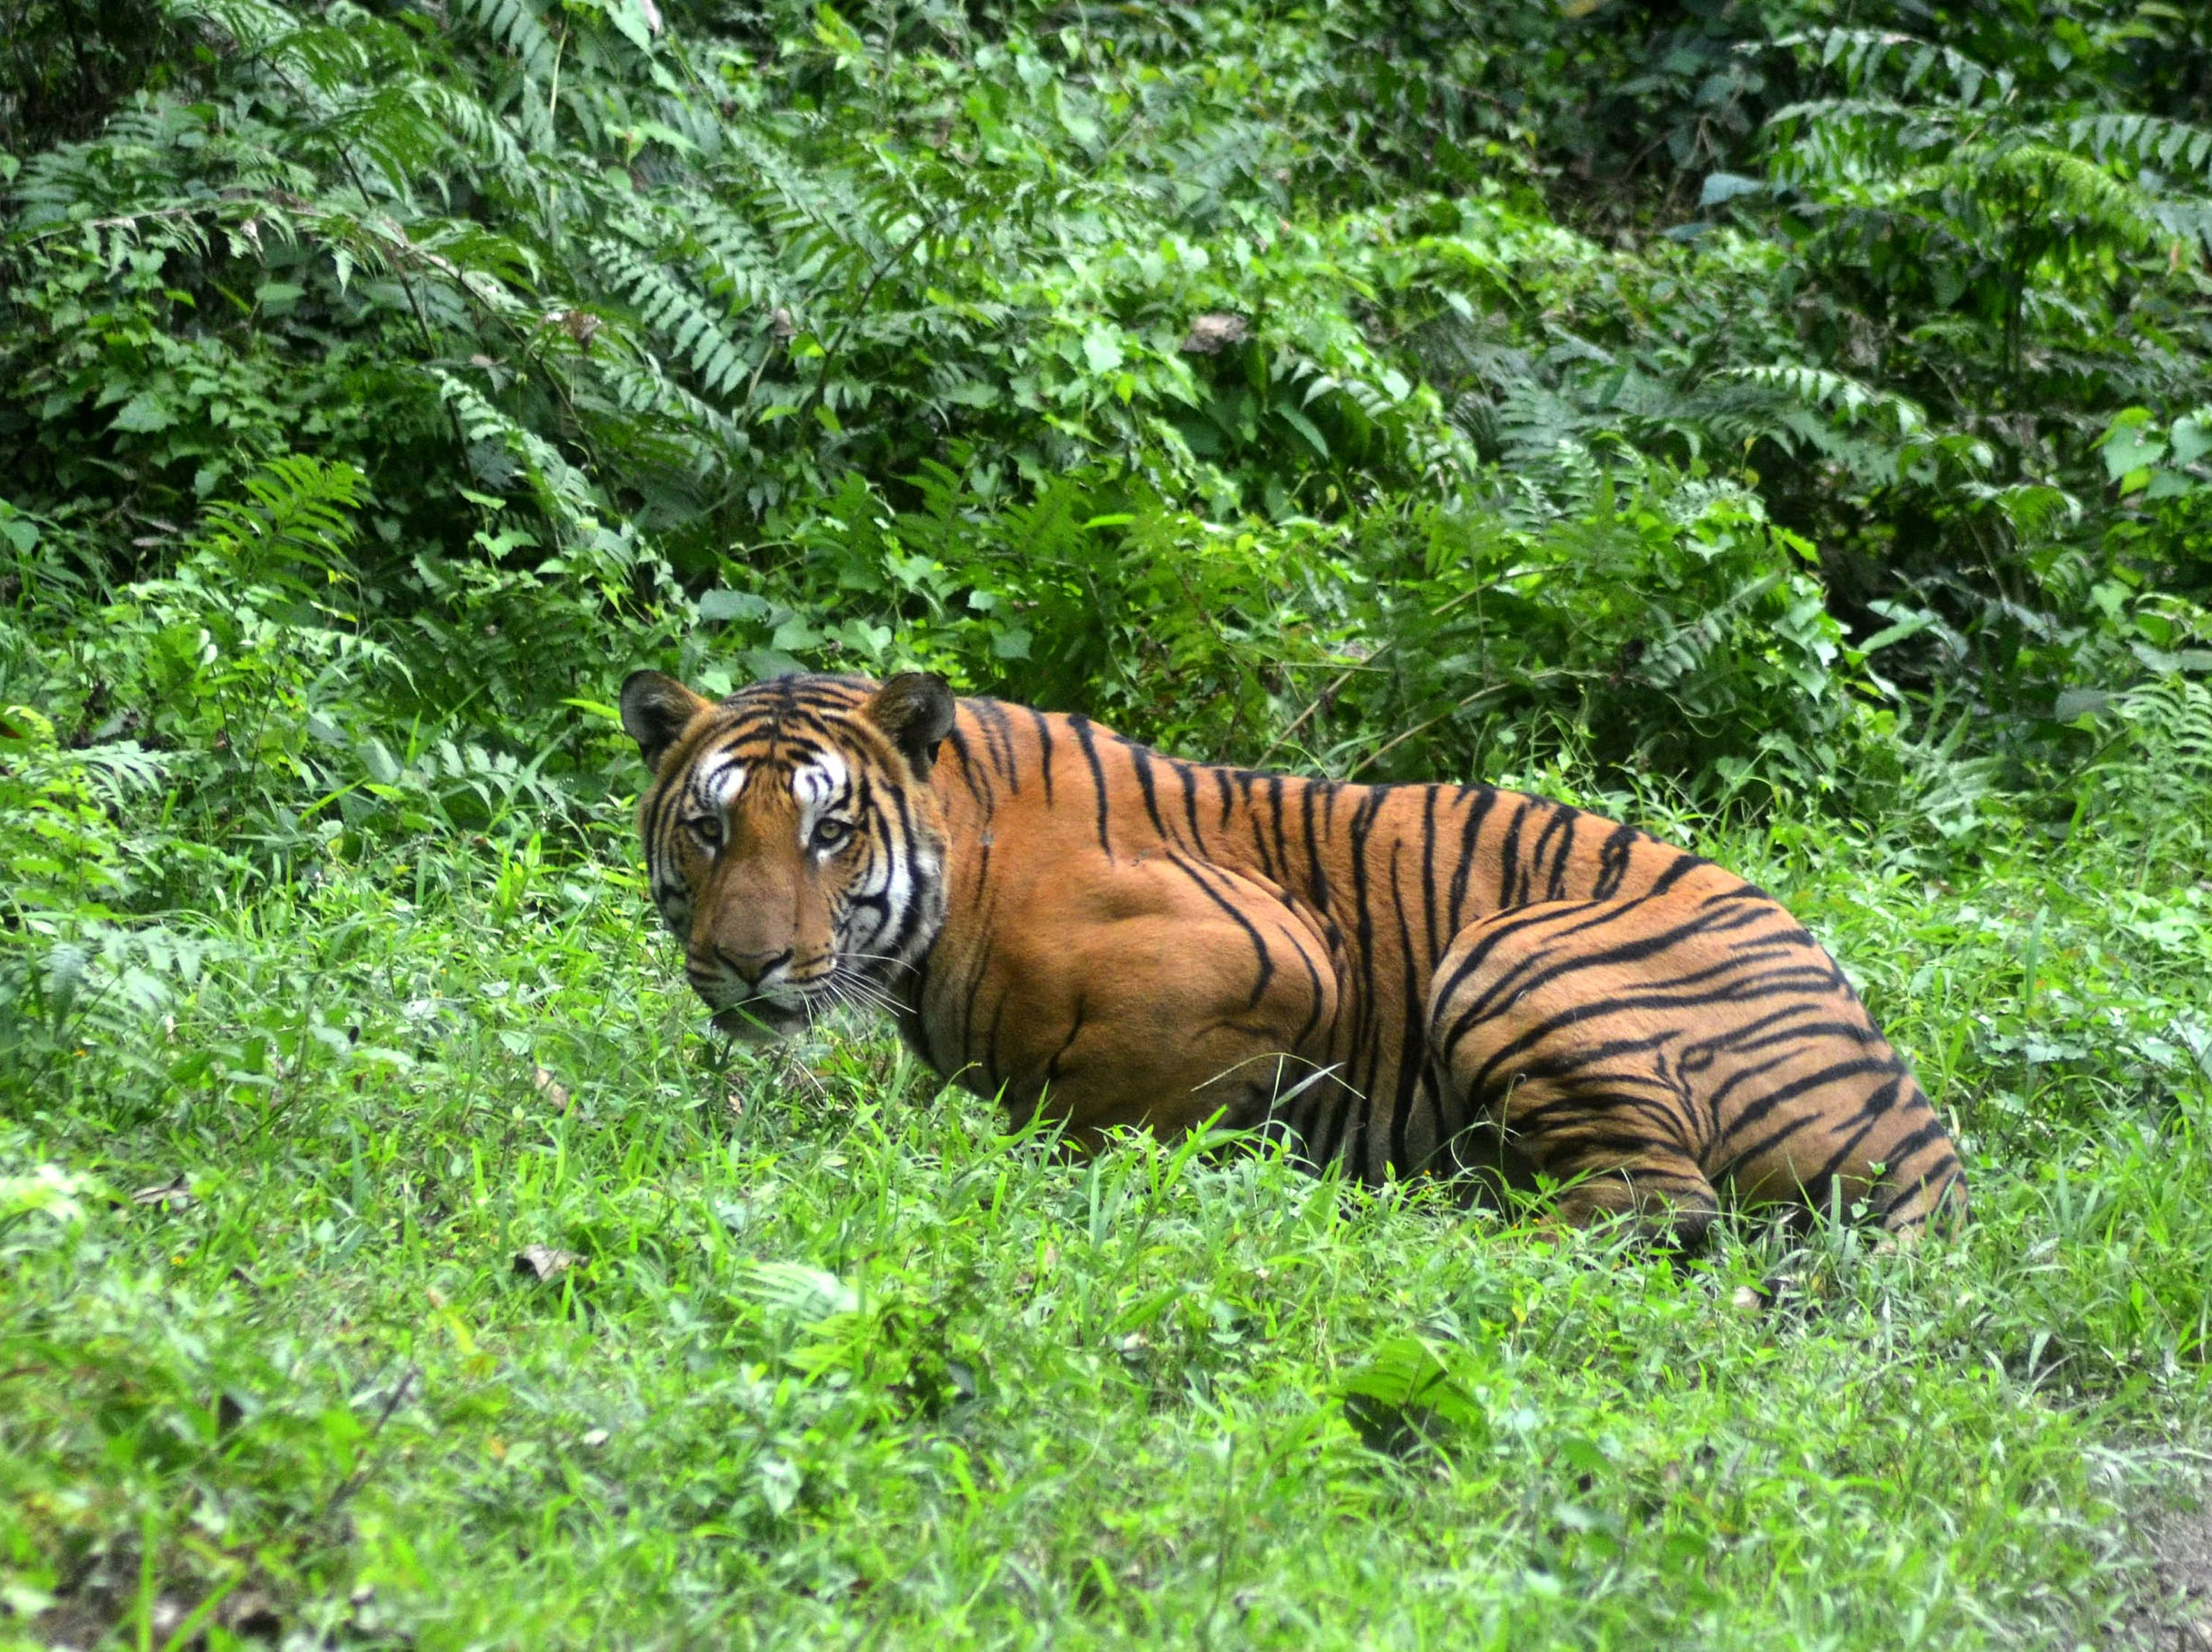 A Royal Bengal Tiger pauses in a jungle clearing in Kaziranga National Park, some 280 km east of Guwahati, India, In this photograph taken on Dec. 21, 2014 (STRDEL—AFP/Getty Images)